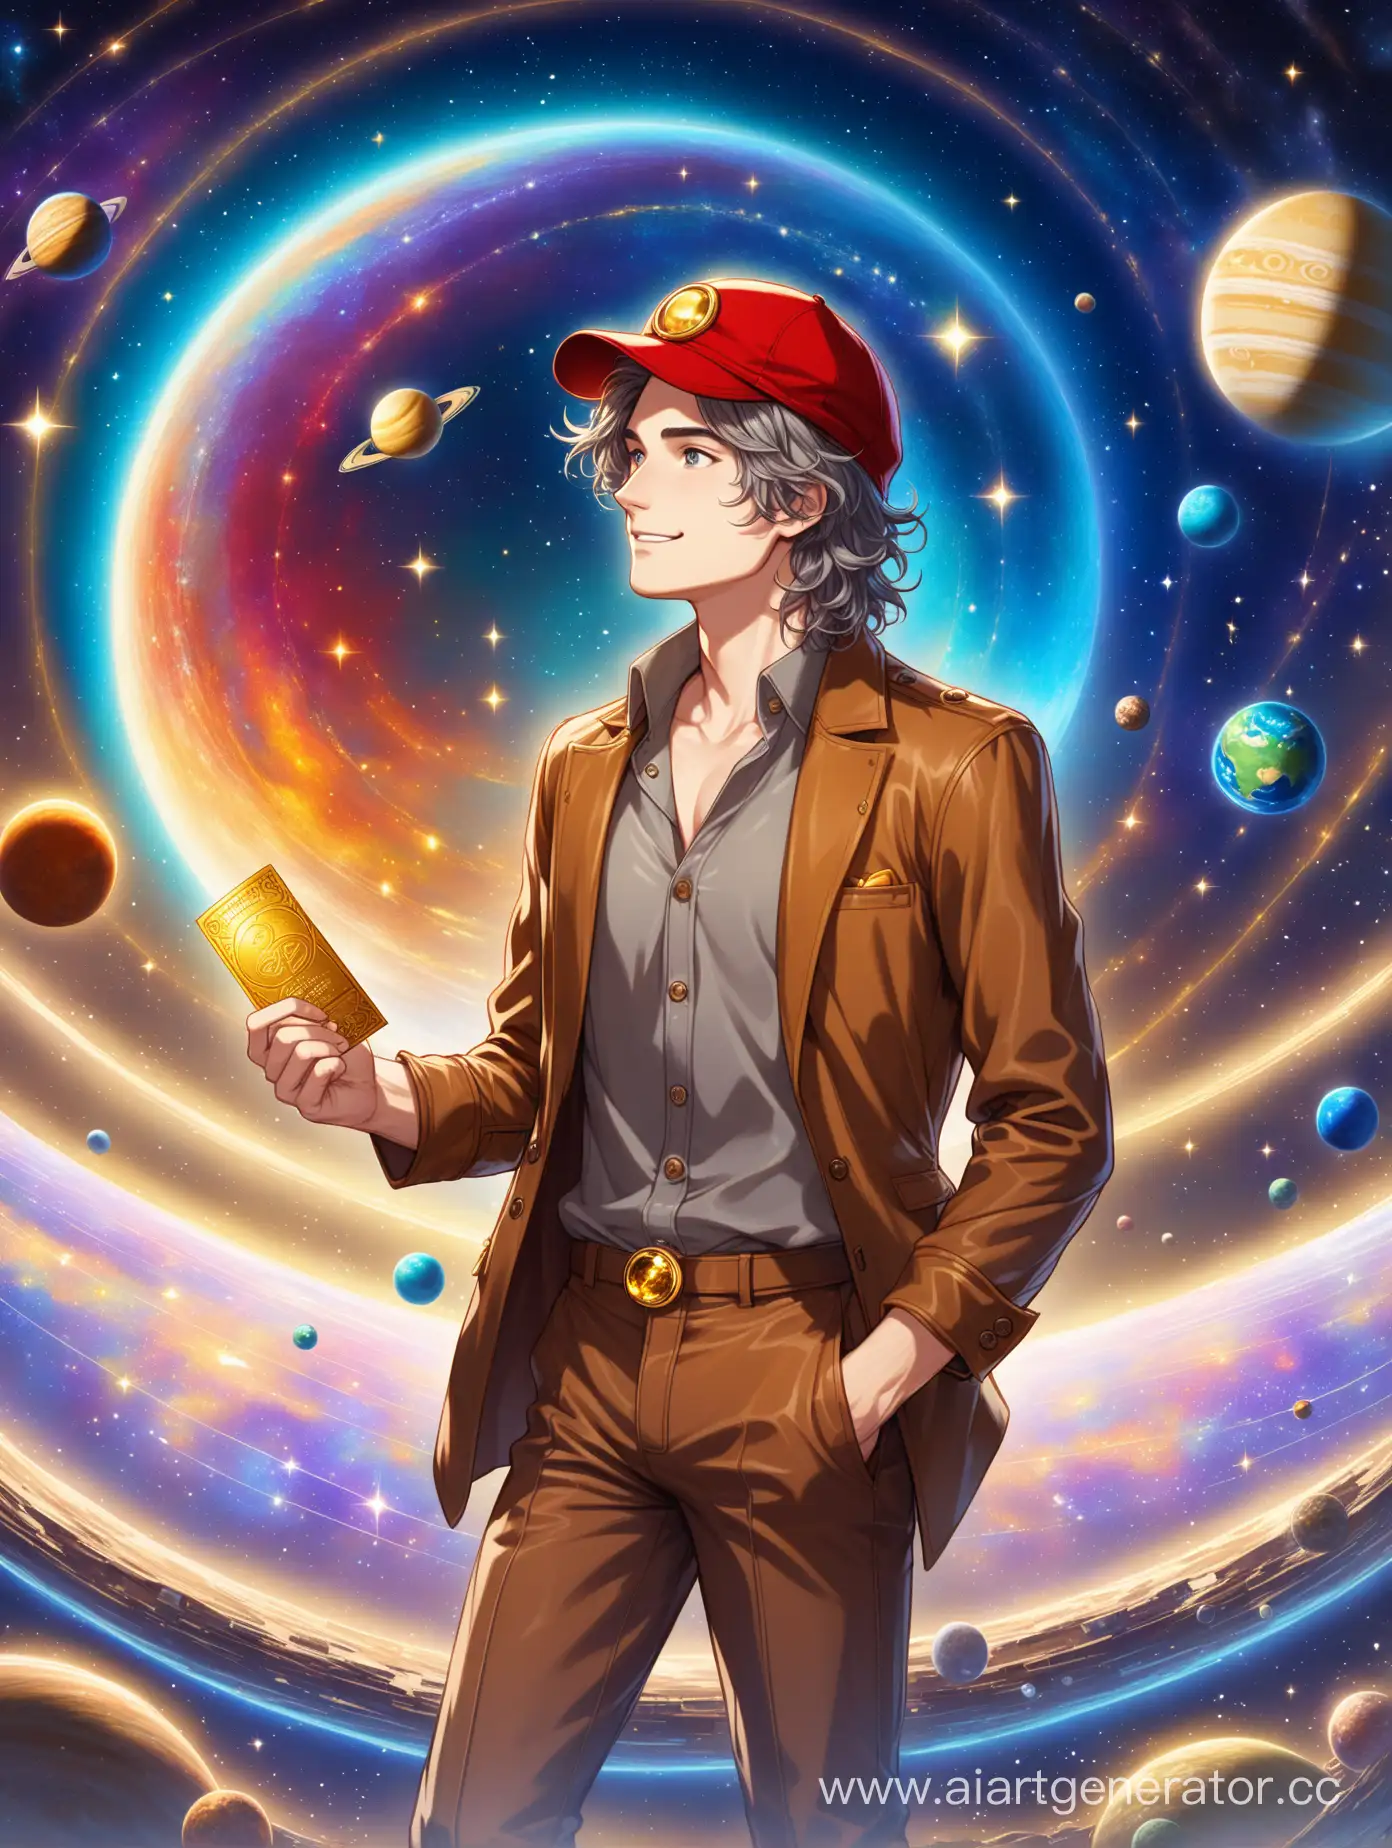 Visionary-Wanderer-with-Cosmic-Ticket-GrayHaired-Man-Amidst-Galactic-Splendor